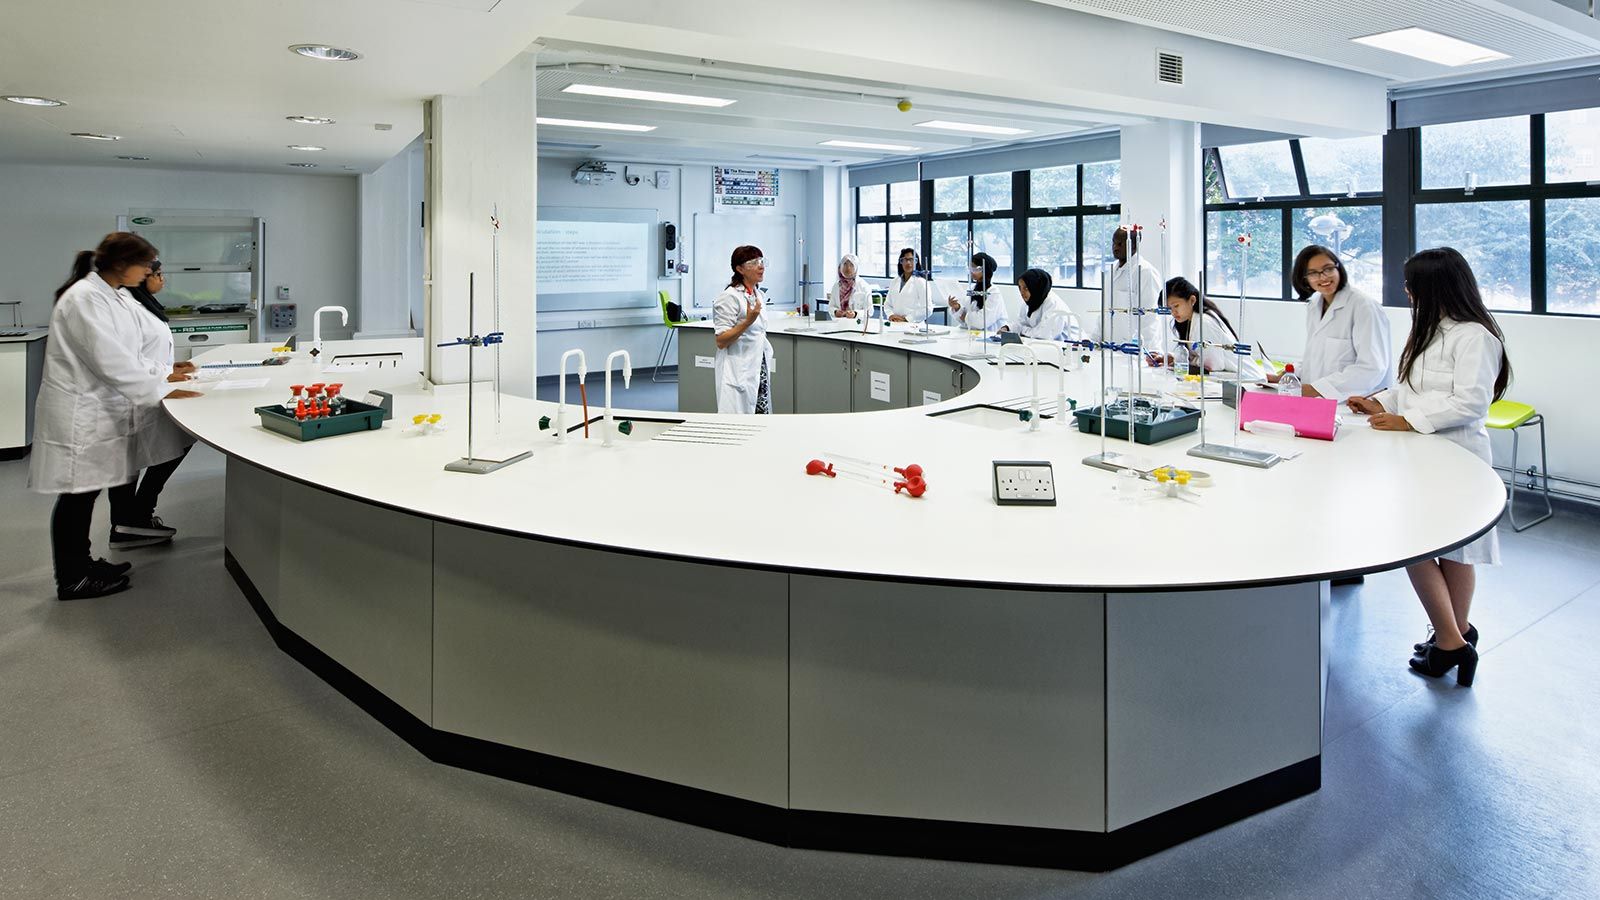 Students in a science laboratory room - Mace Group